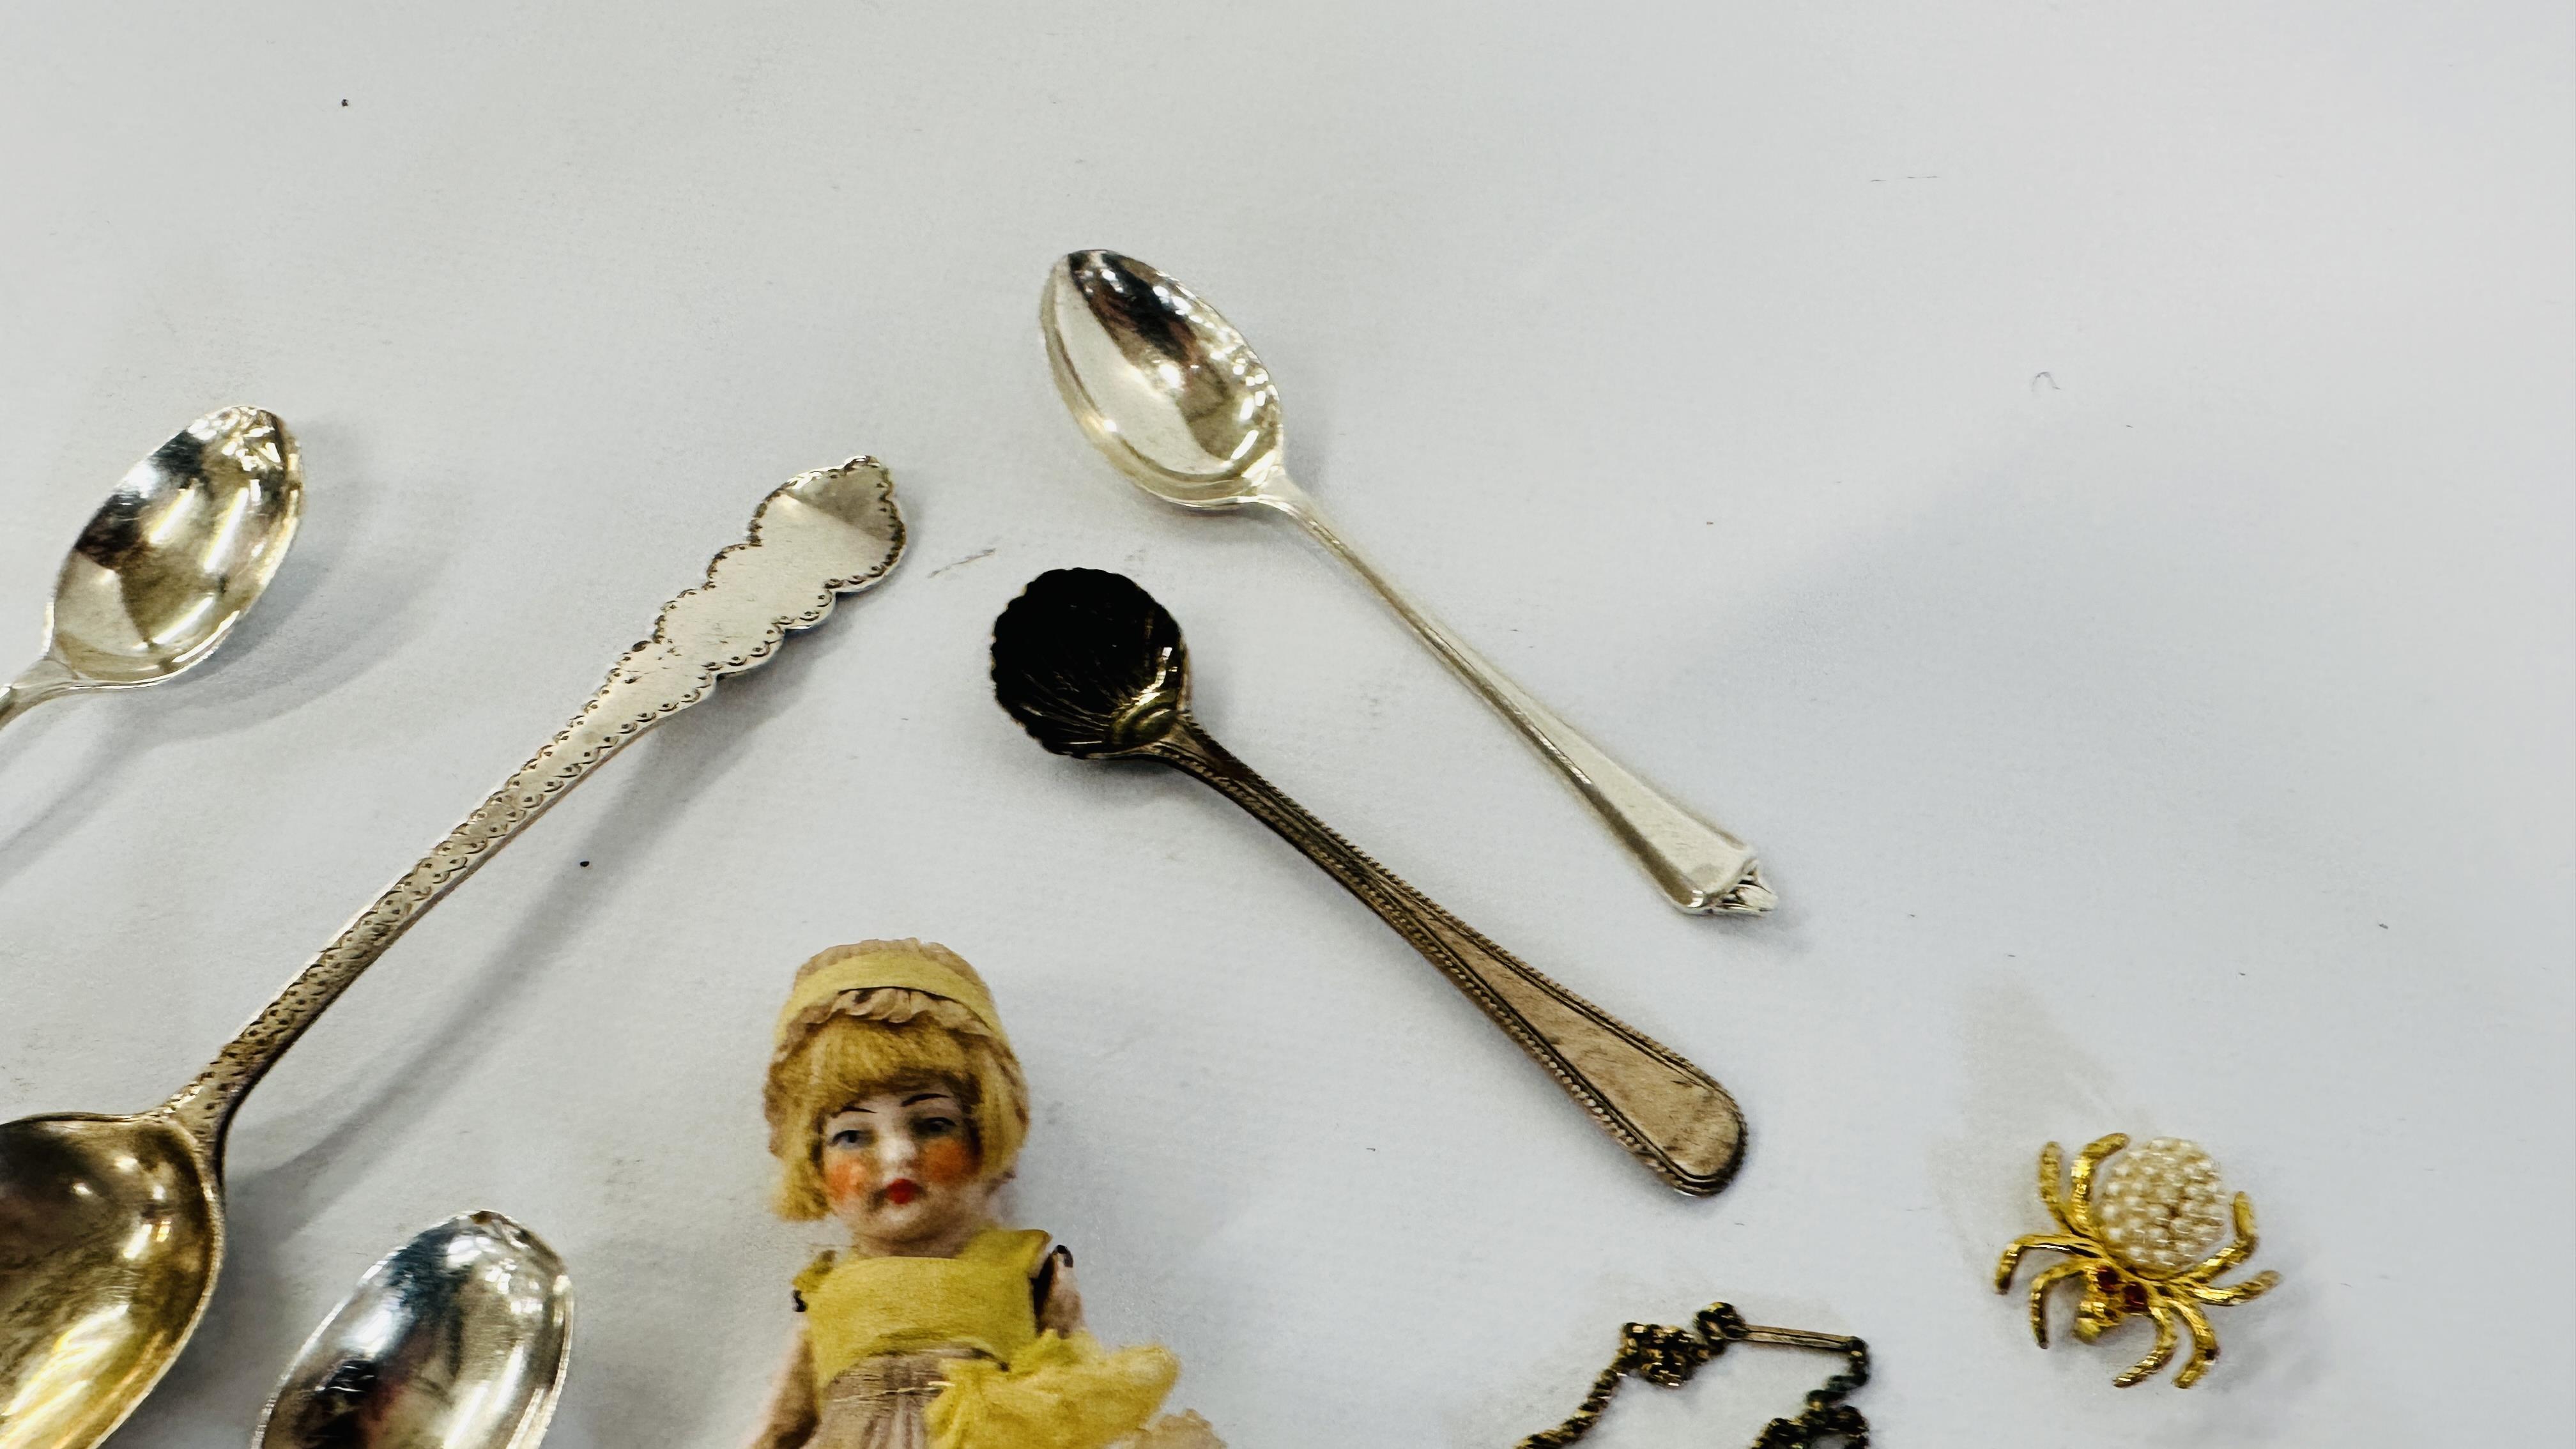 A GROUP OF 8 ASSORTED SILVER SPOONS, GILT SPIDER BROOCH ETC. AND A VINTAGE BISQUE MINIATURE DOLL. - Image 7 of 8